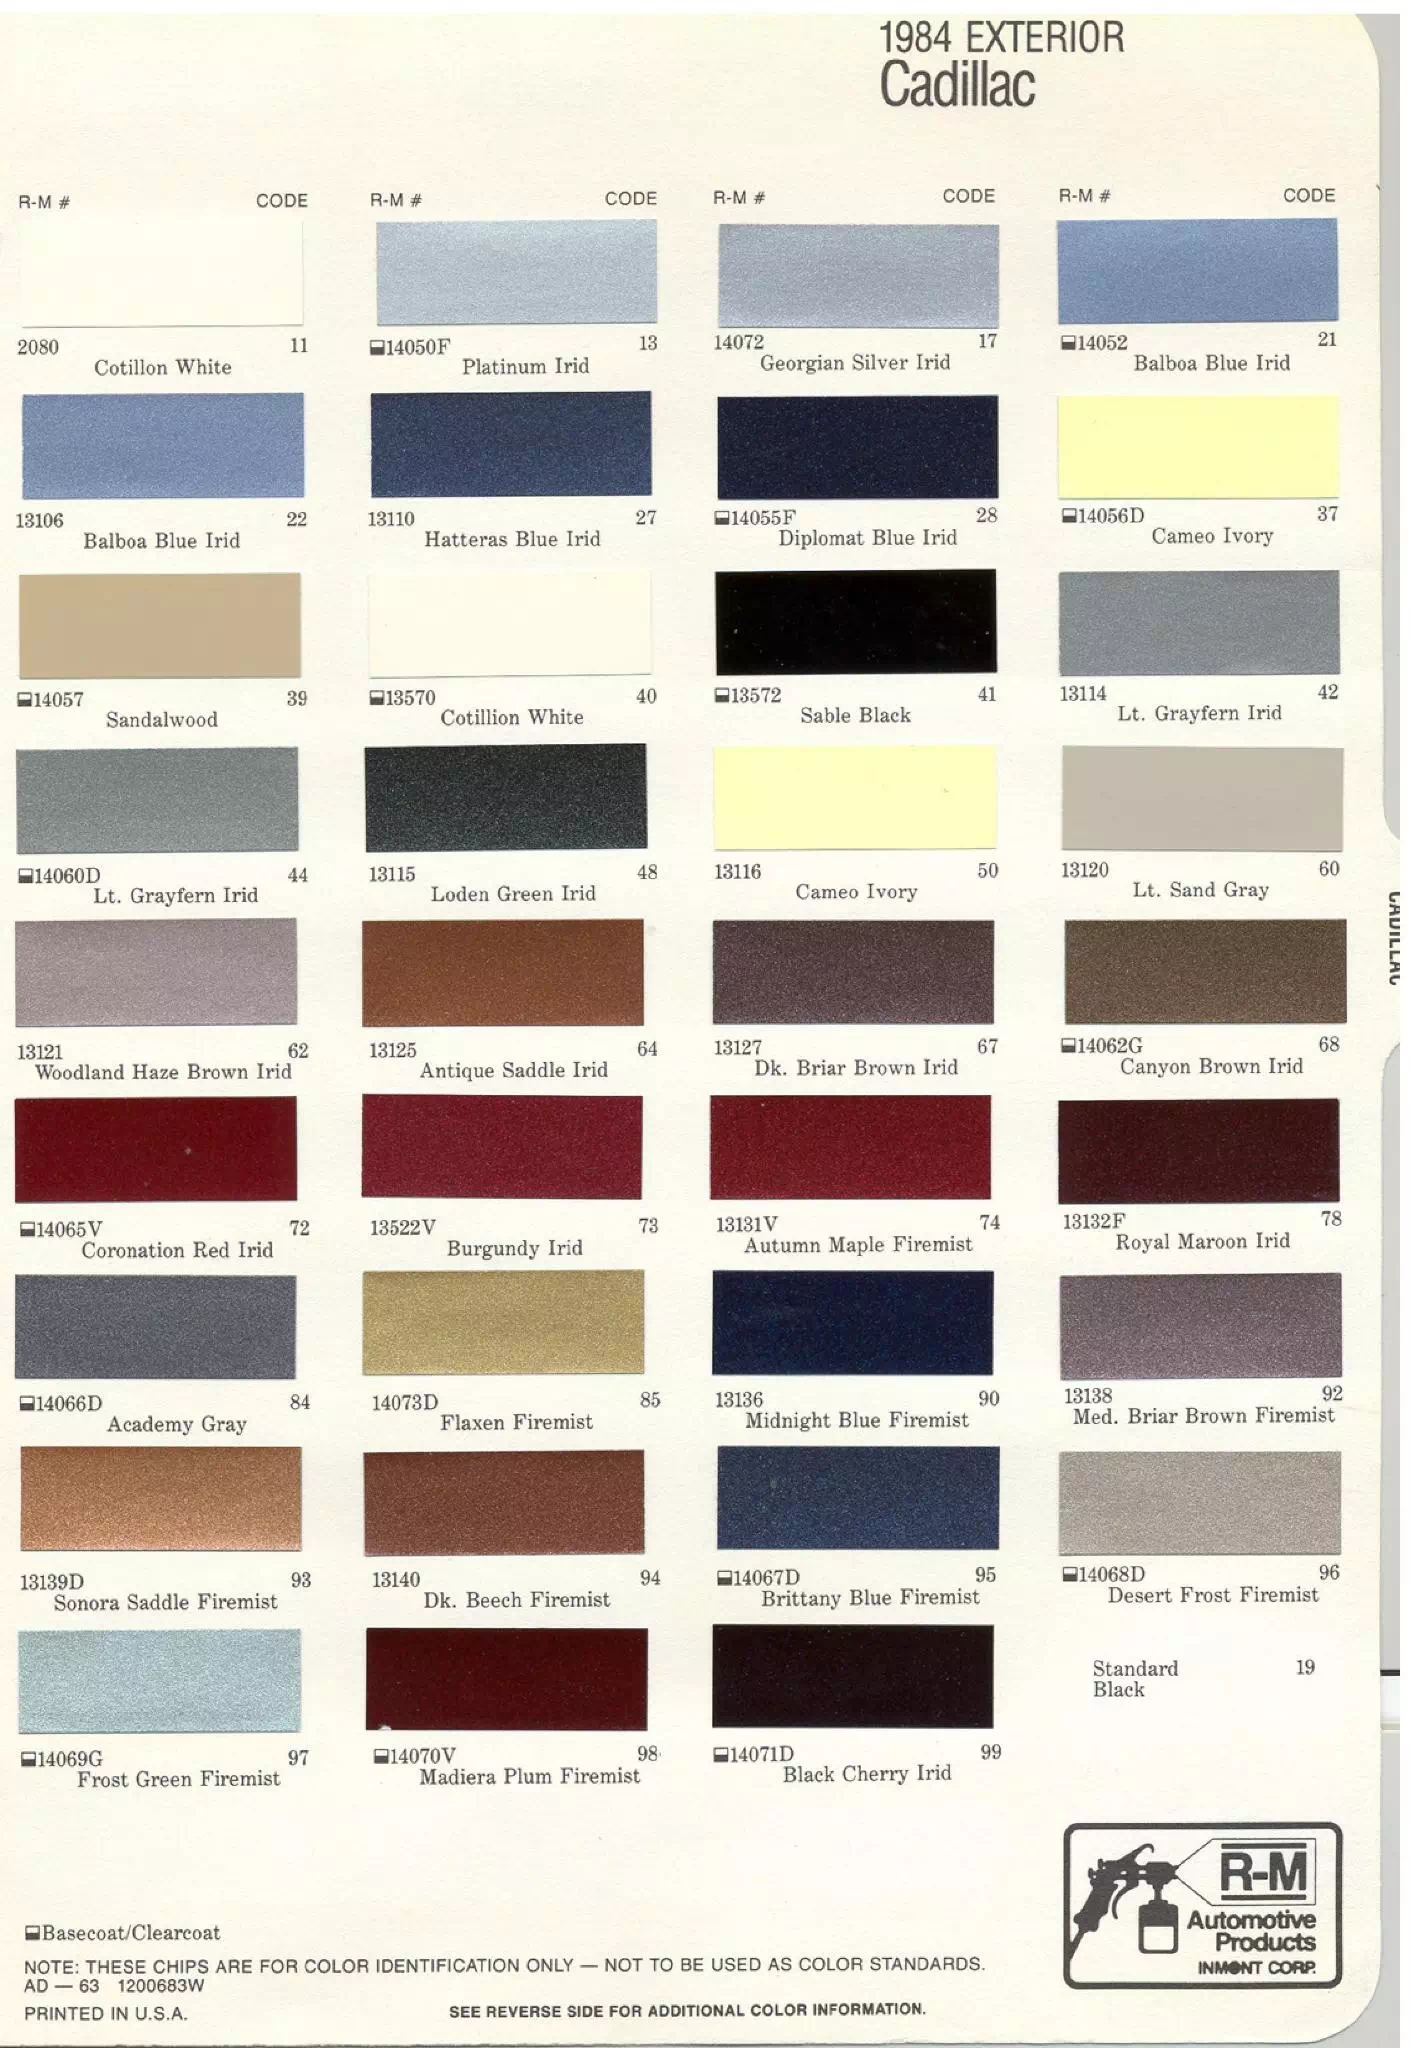 General Motors oem paint swatches, color codes and color names for 1984 vehicles.